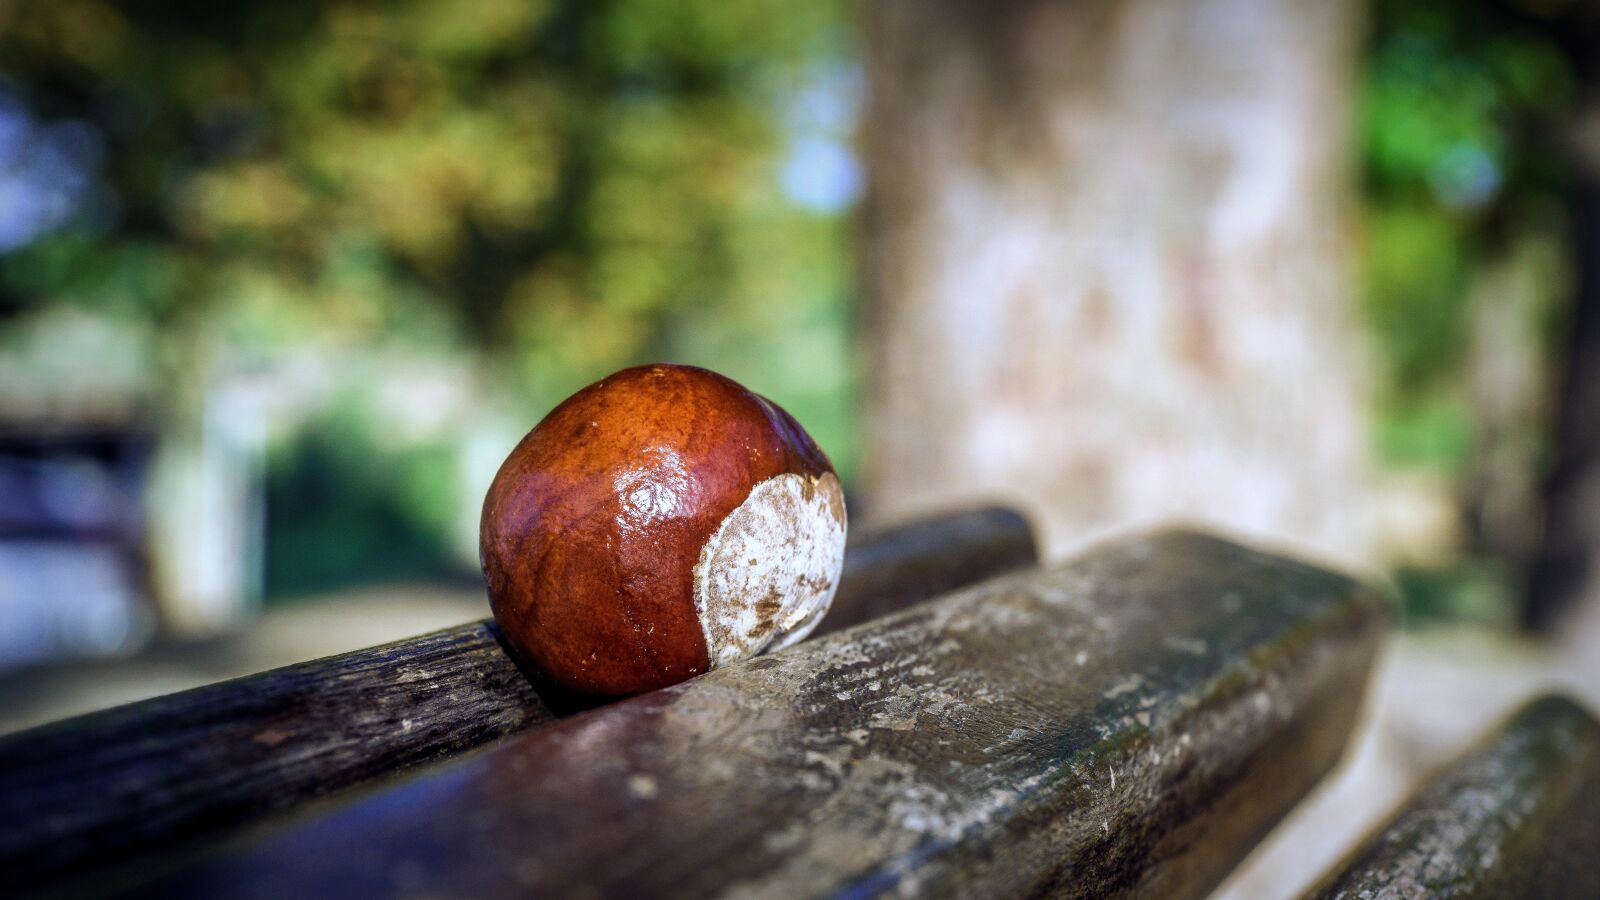 Sony a6000 sample photo. Chestnuts, fruit, brown photography